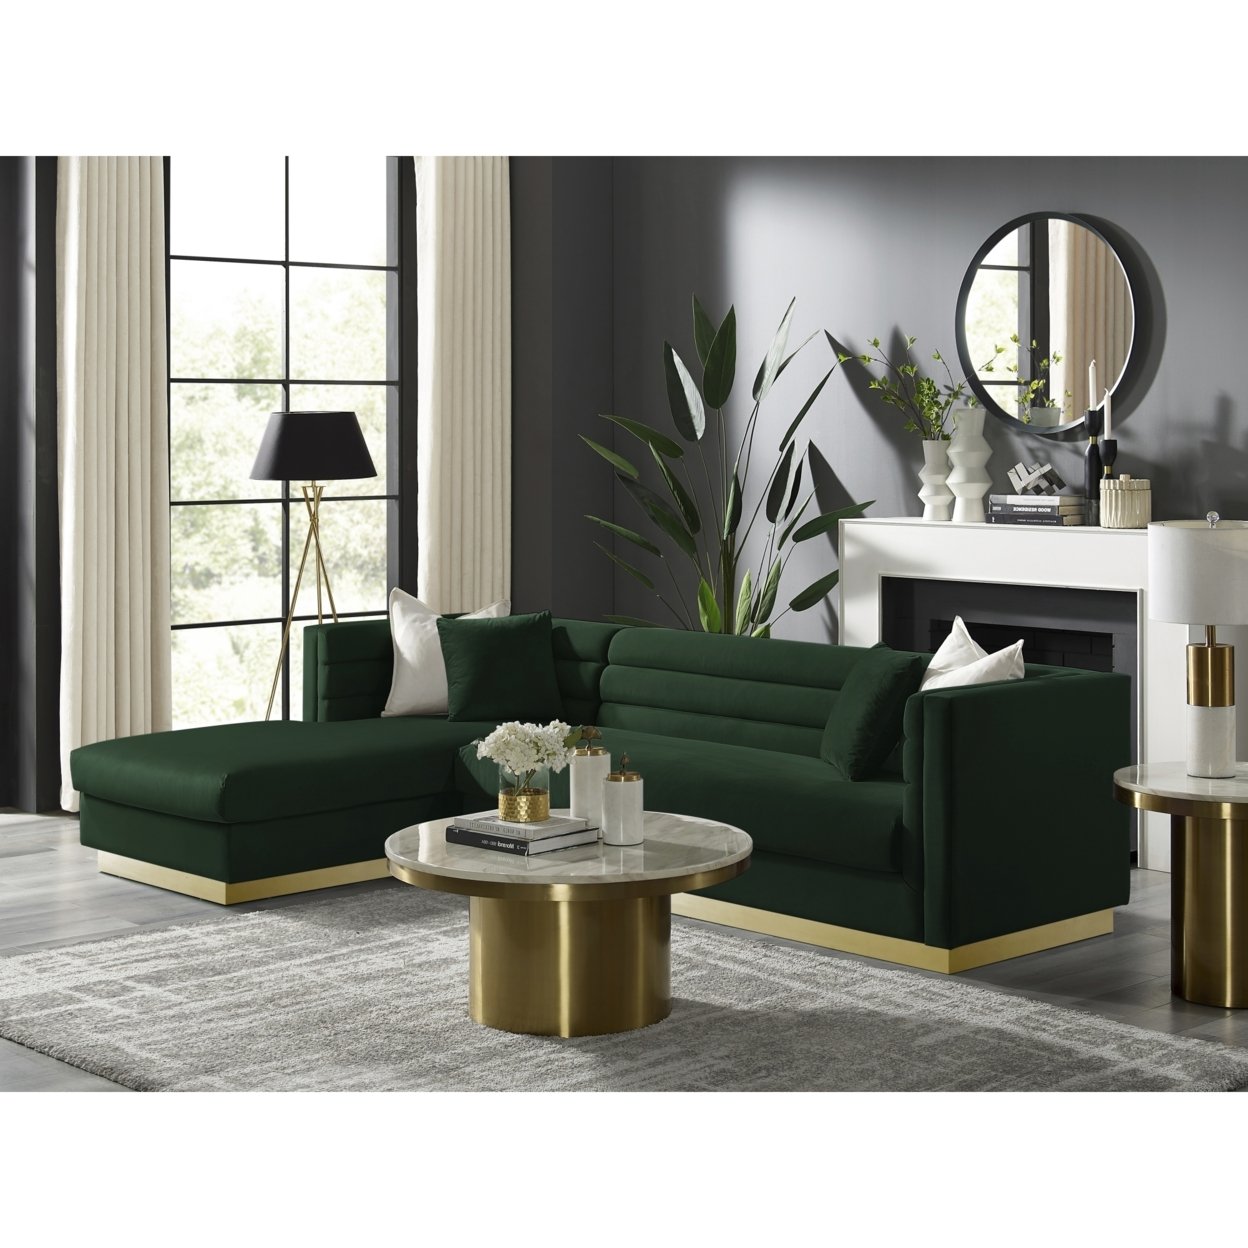 Aja Sofa-Upholstered-Sectional-Metal Base, Square Arms-Horizontal Channel Tufting - hunter green